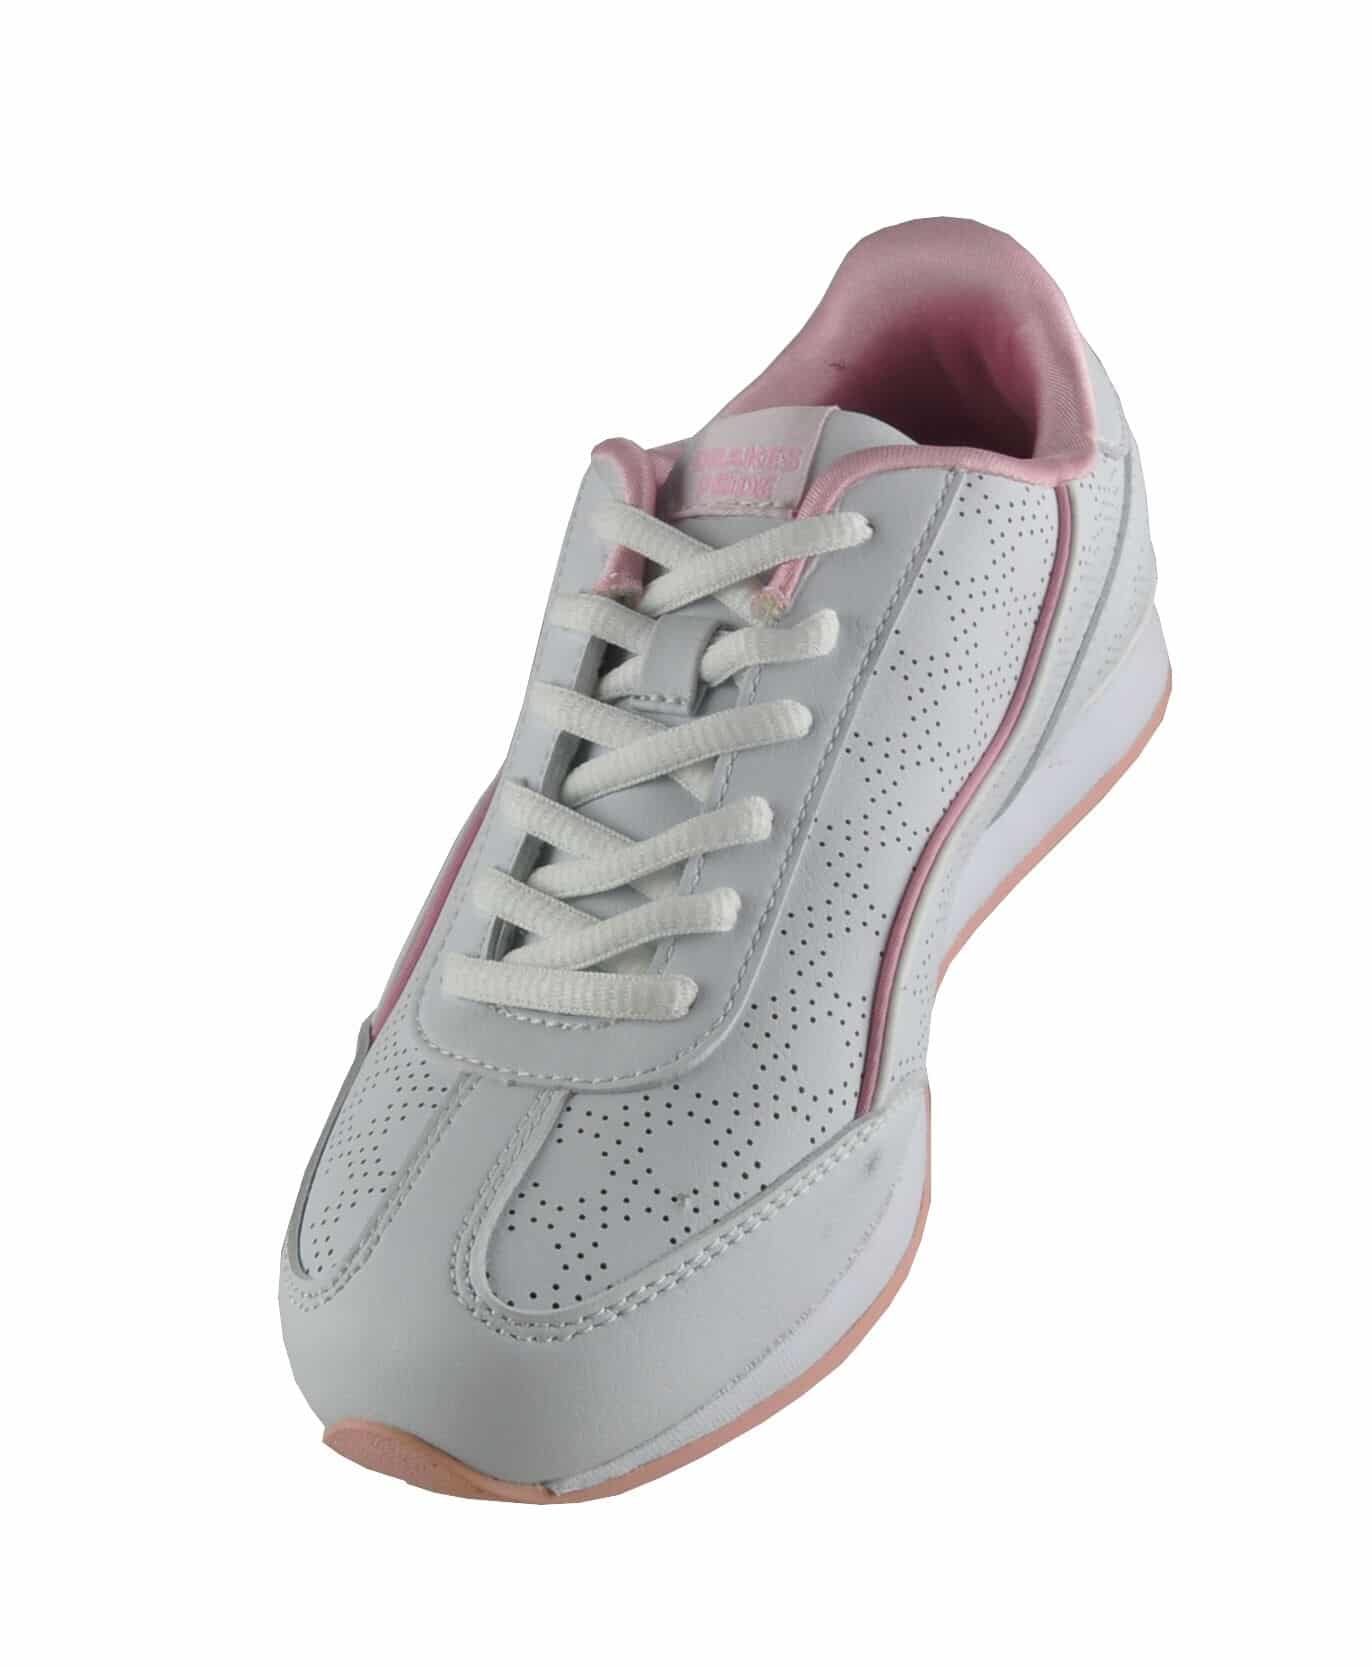 Ladies Bowls Shoes | Bowling Shoes for Women